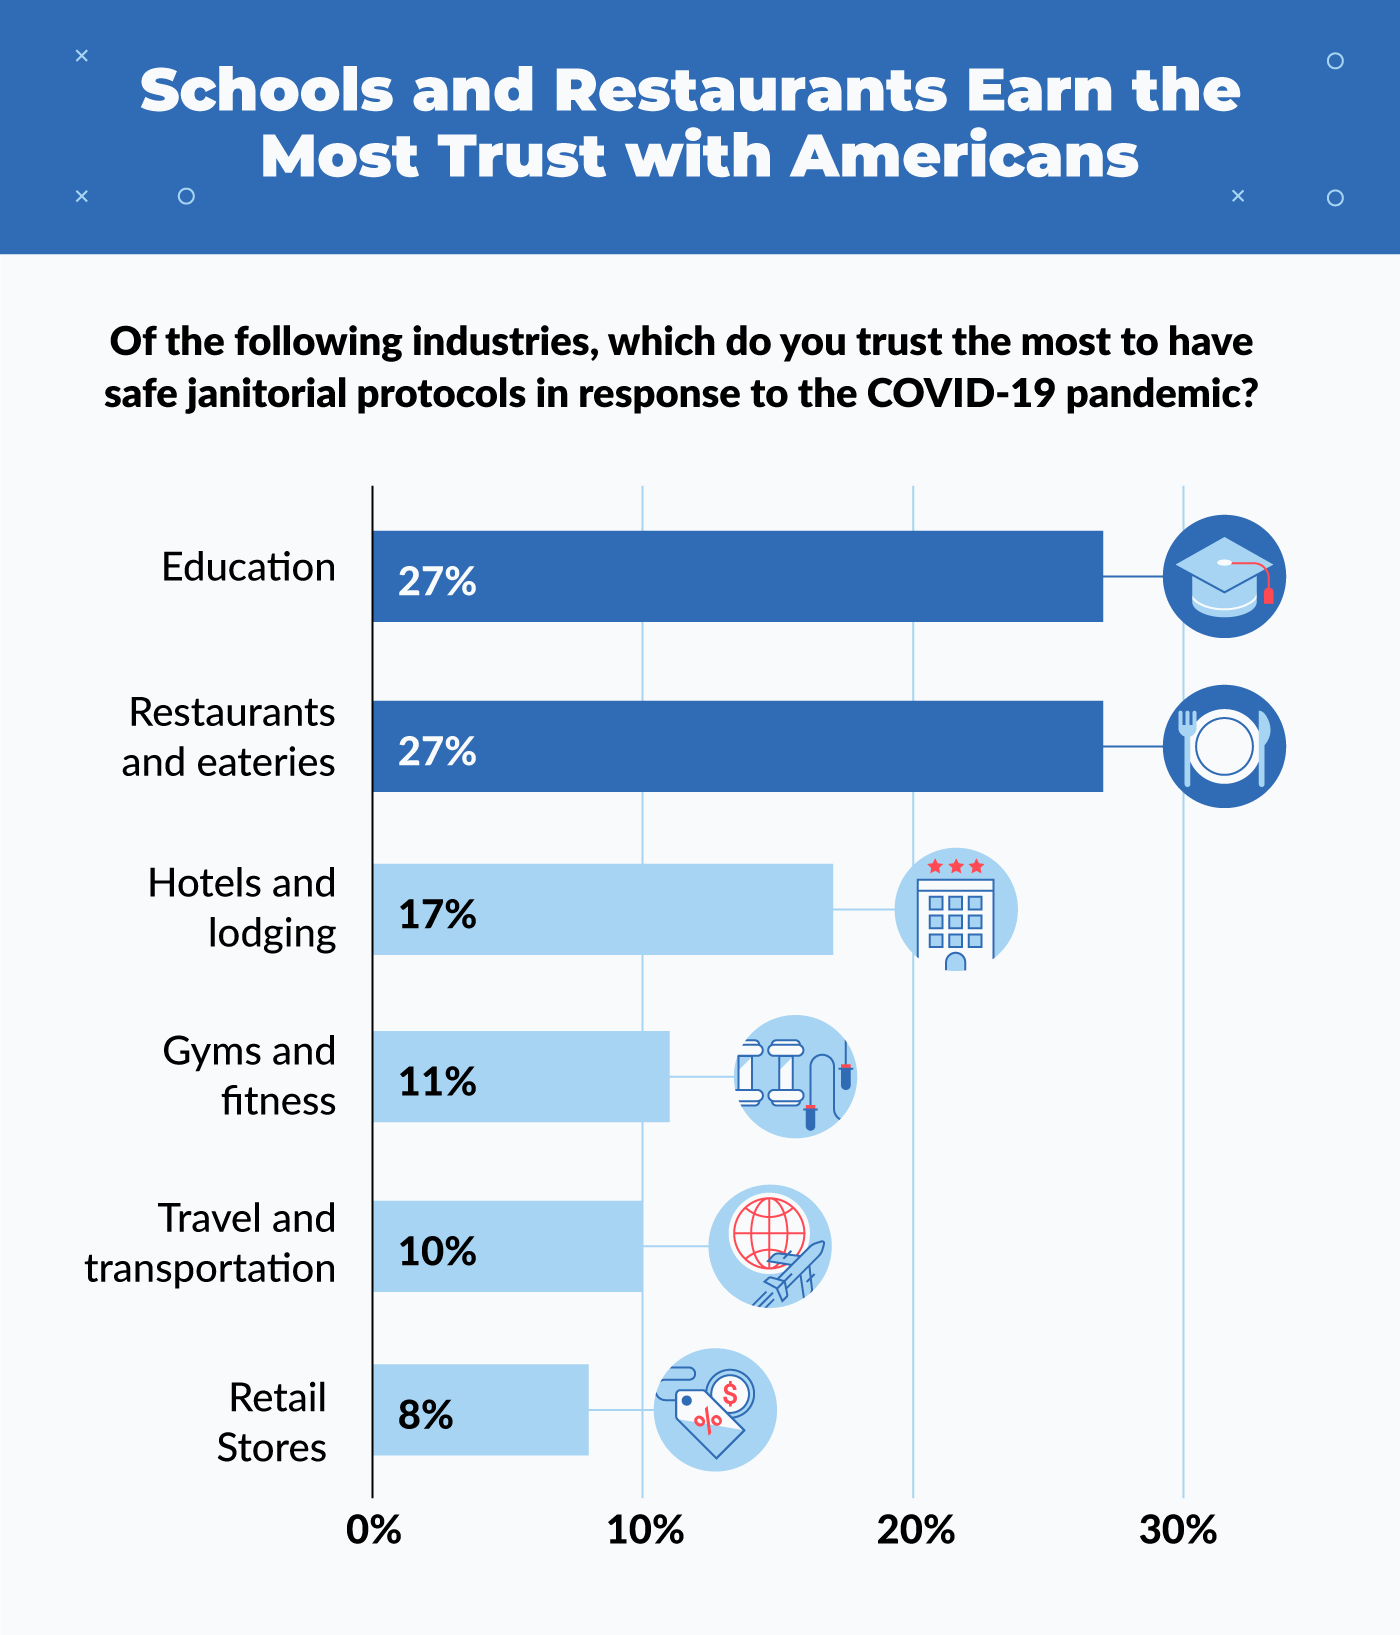 schools and restaurants earn the most trust with Americans